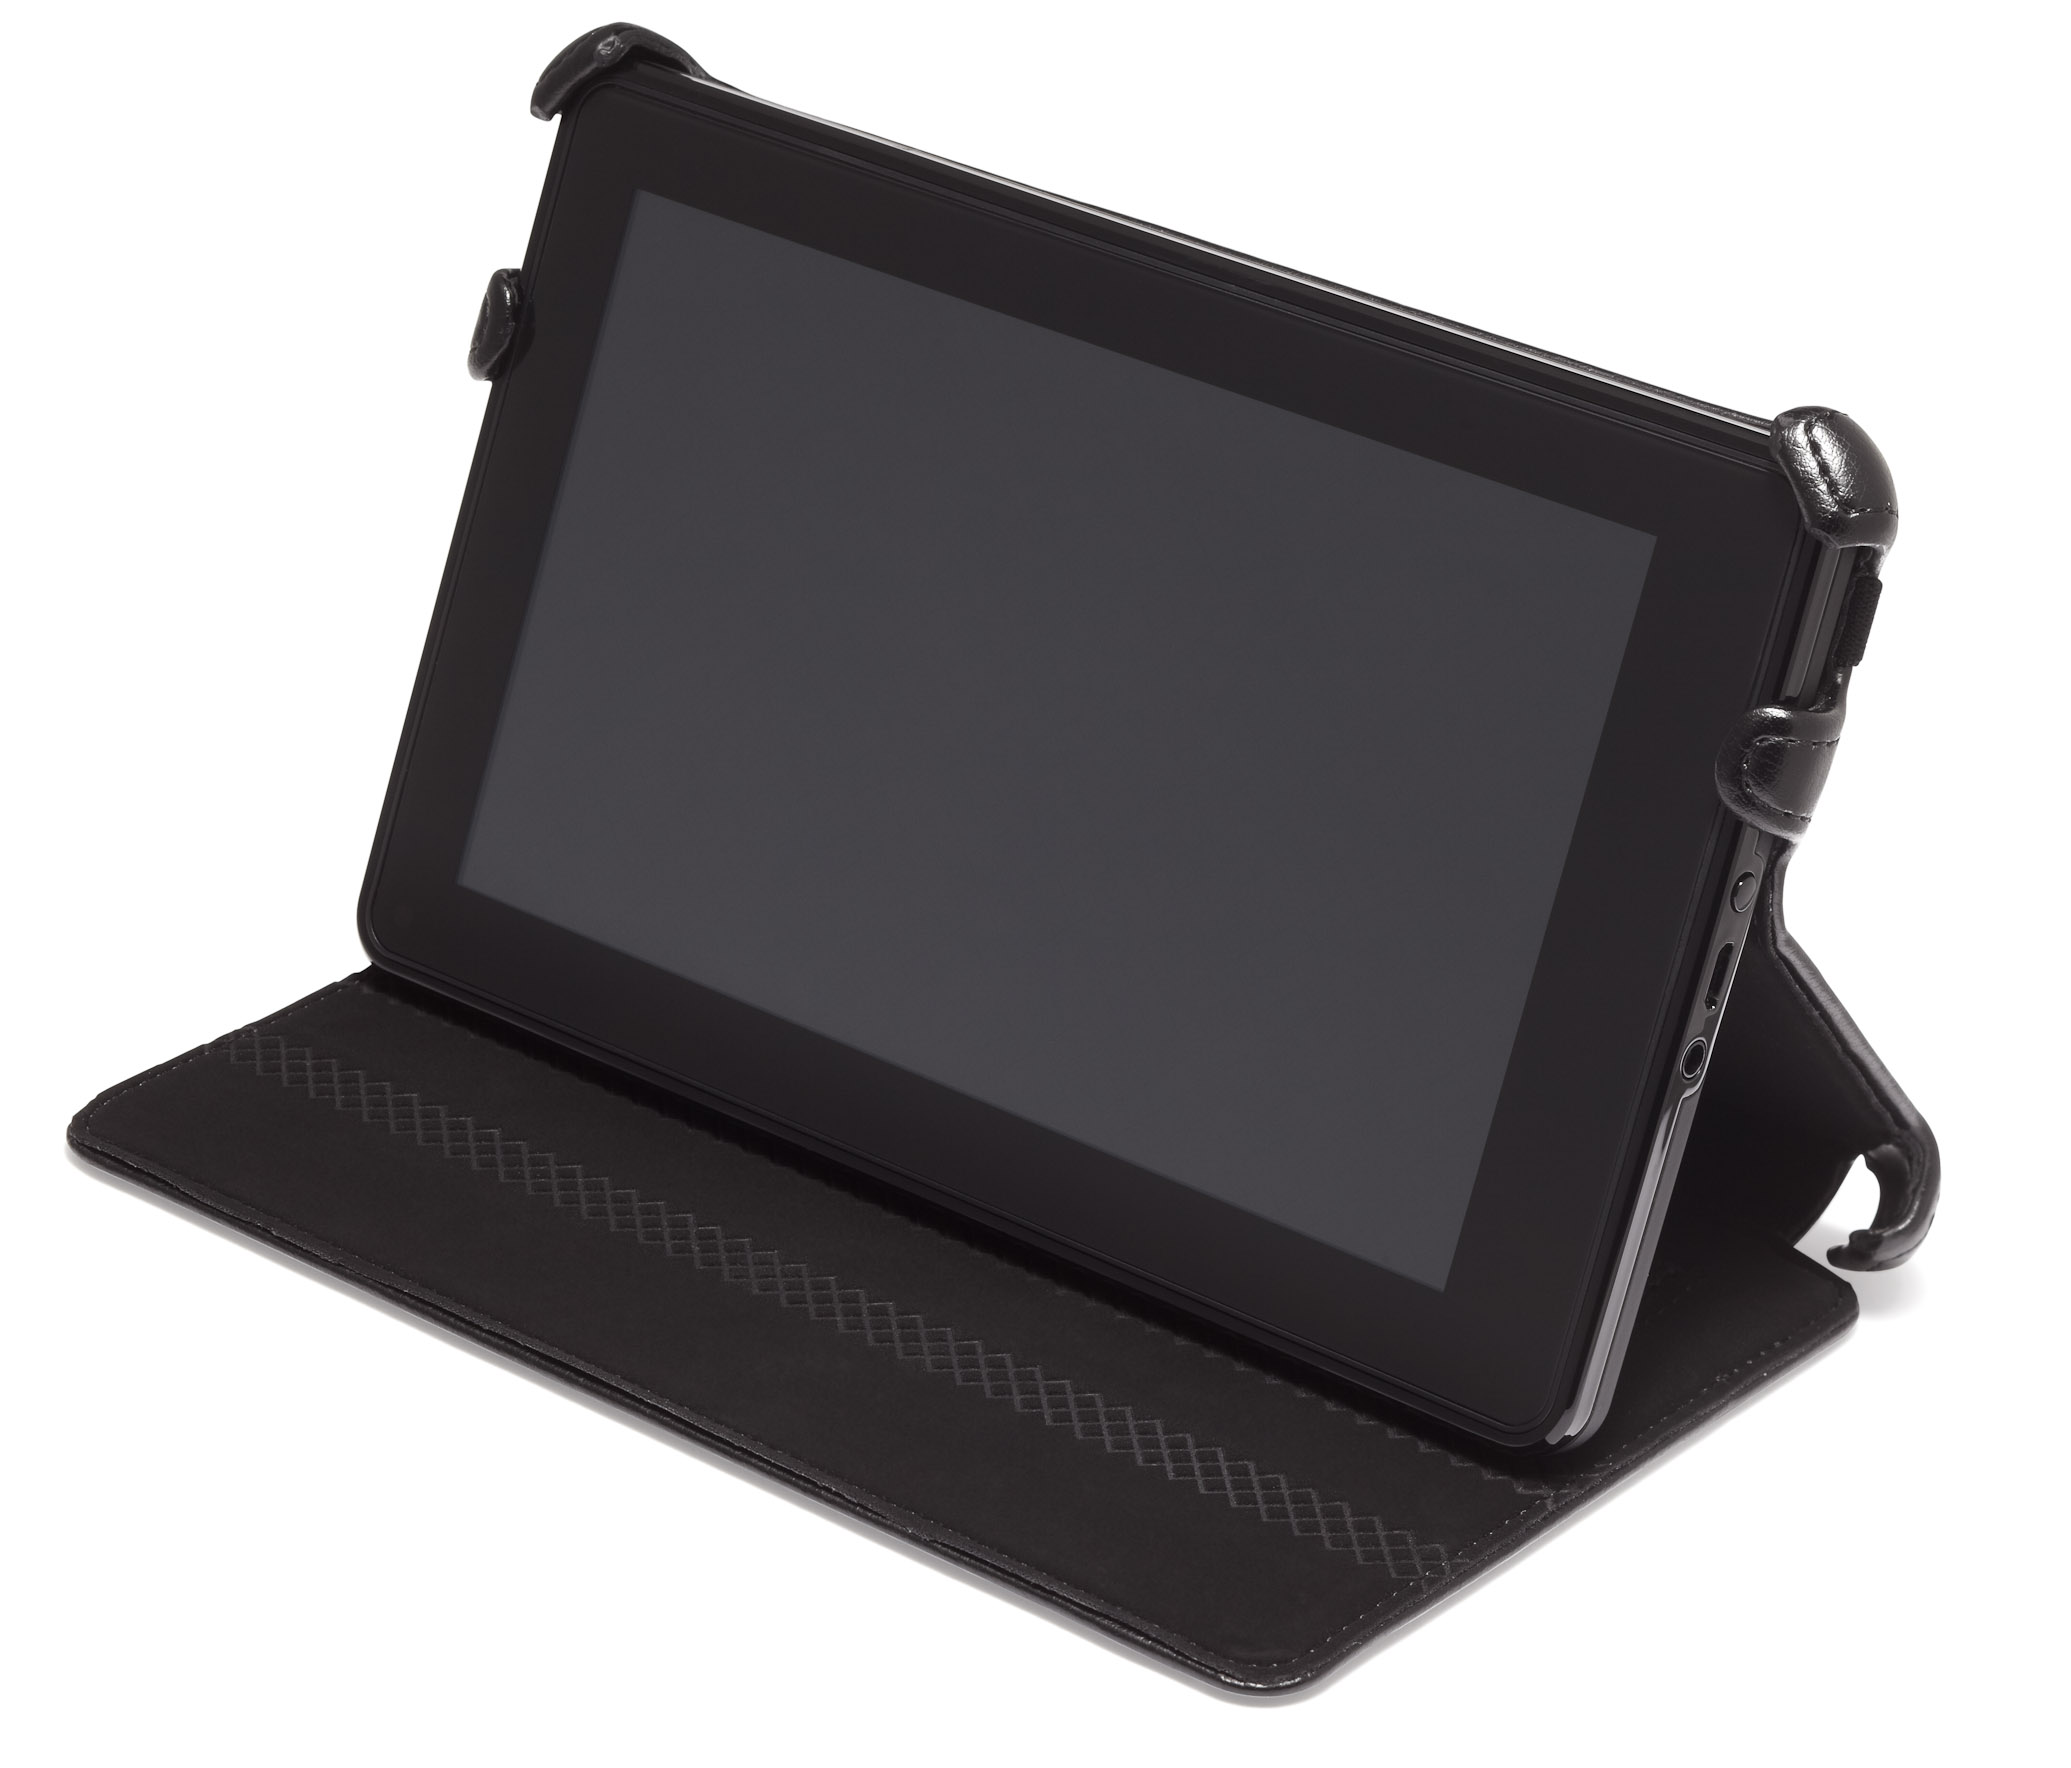 http://thetechjournal.com/wp-content/uploads/images/1110/1317648945-marware-ceo-hybrid-for-kindle-fire-cover-1.jpg